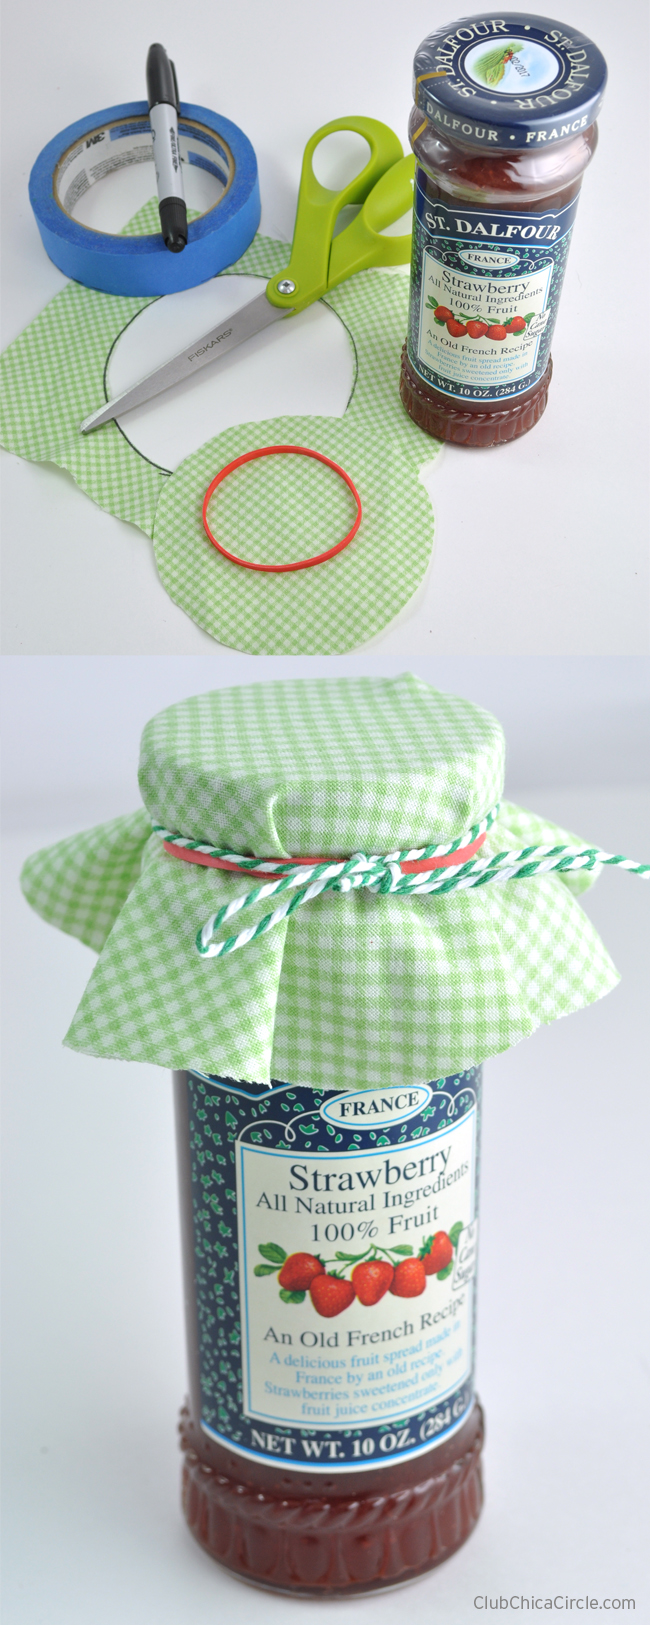 How to Dress Up Jam for Gift Basket